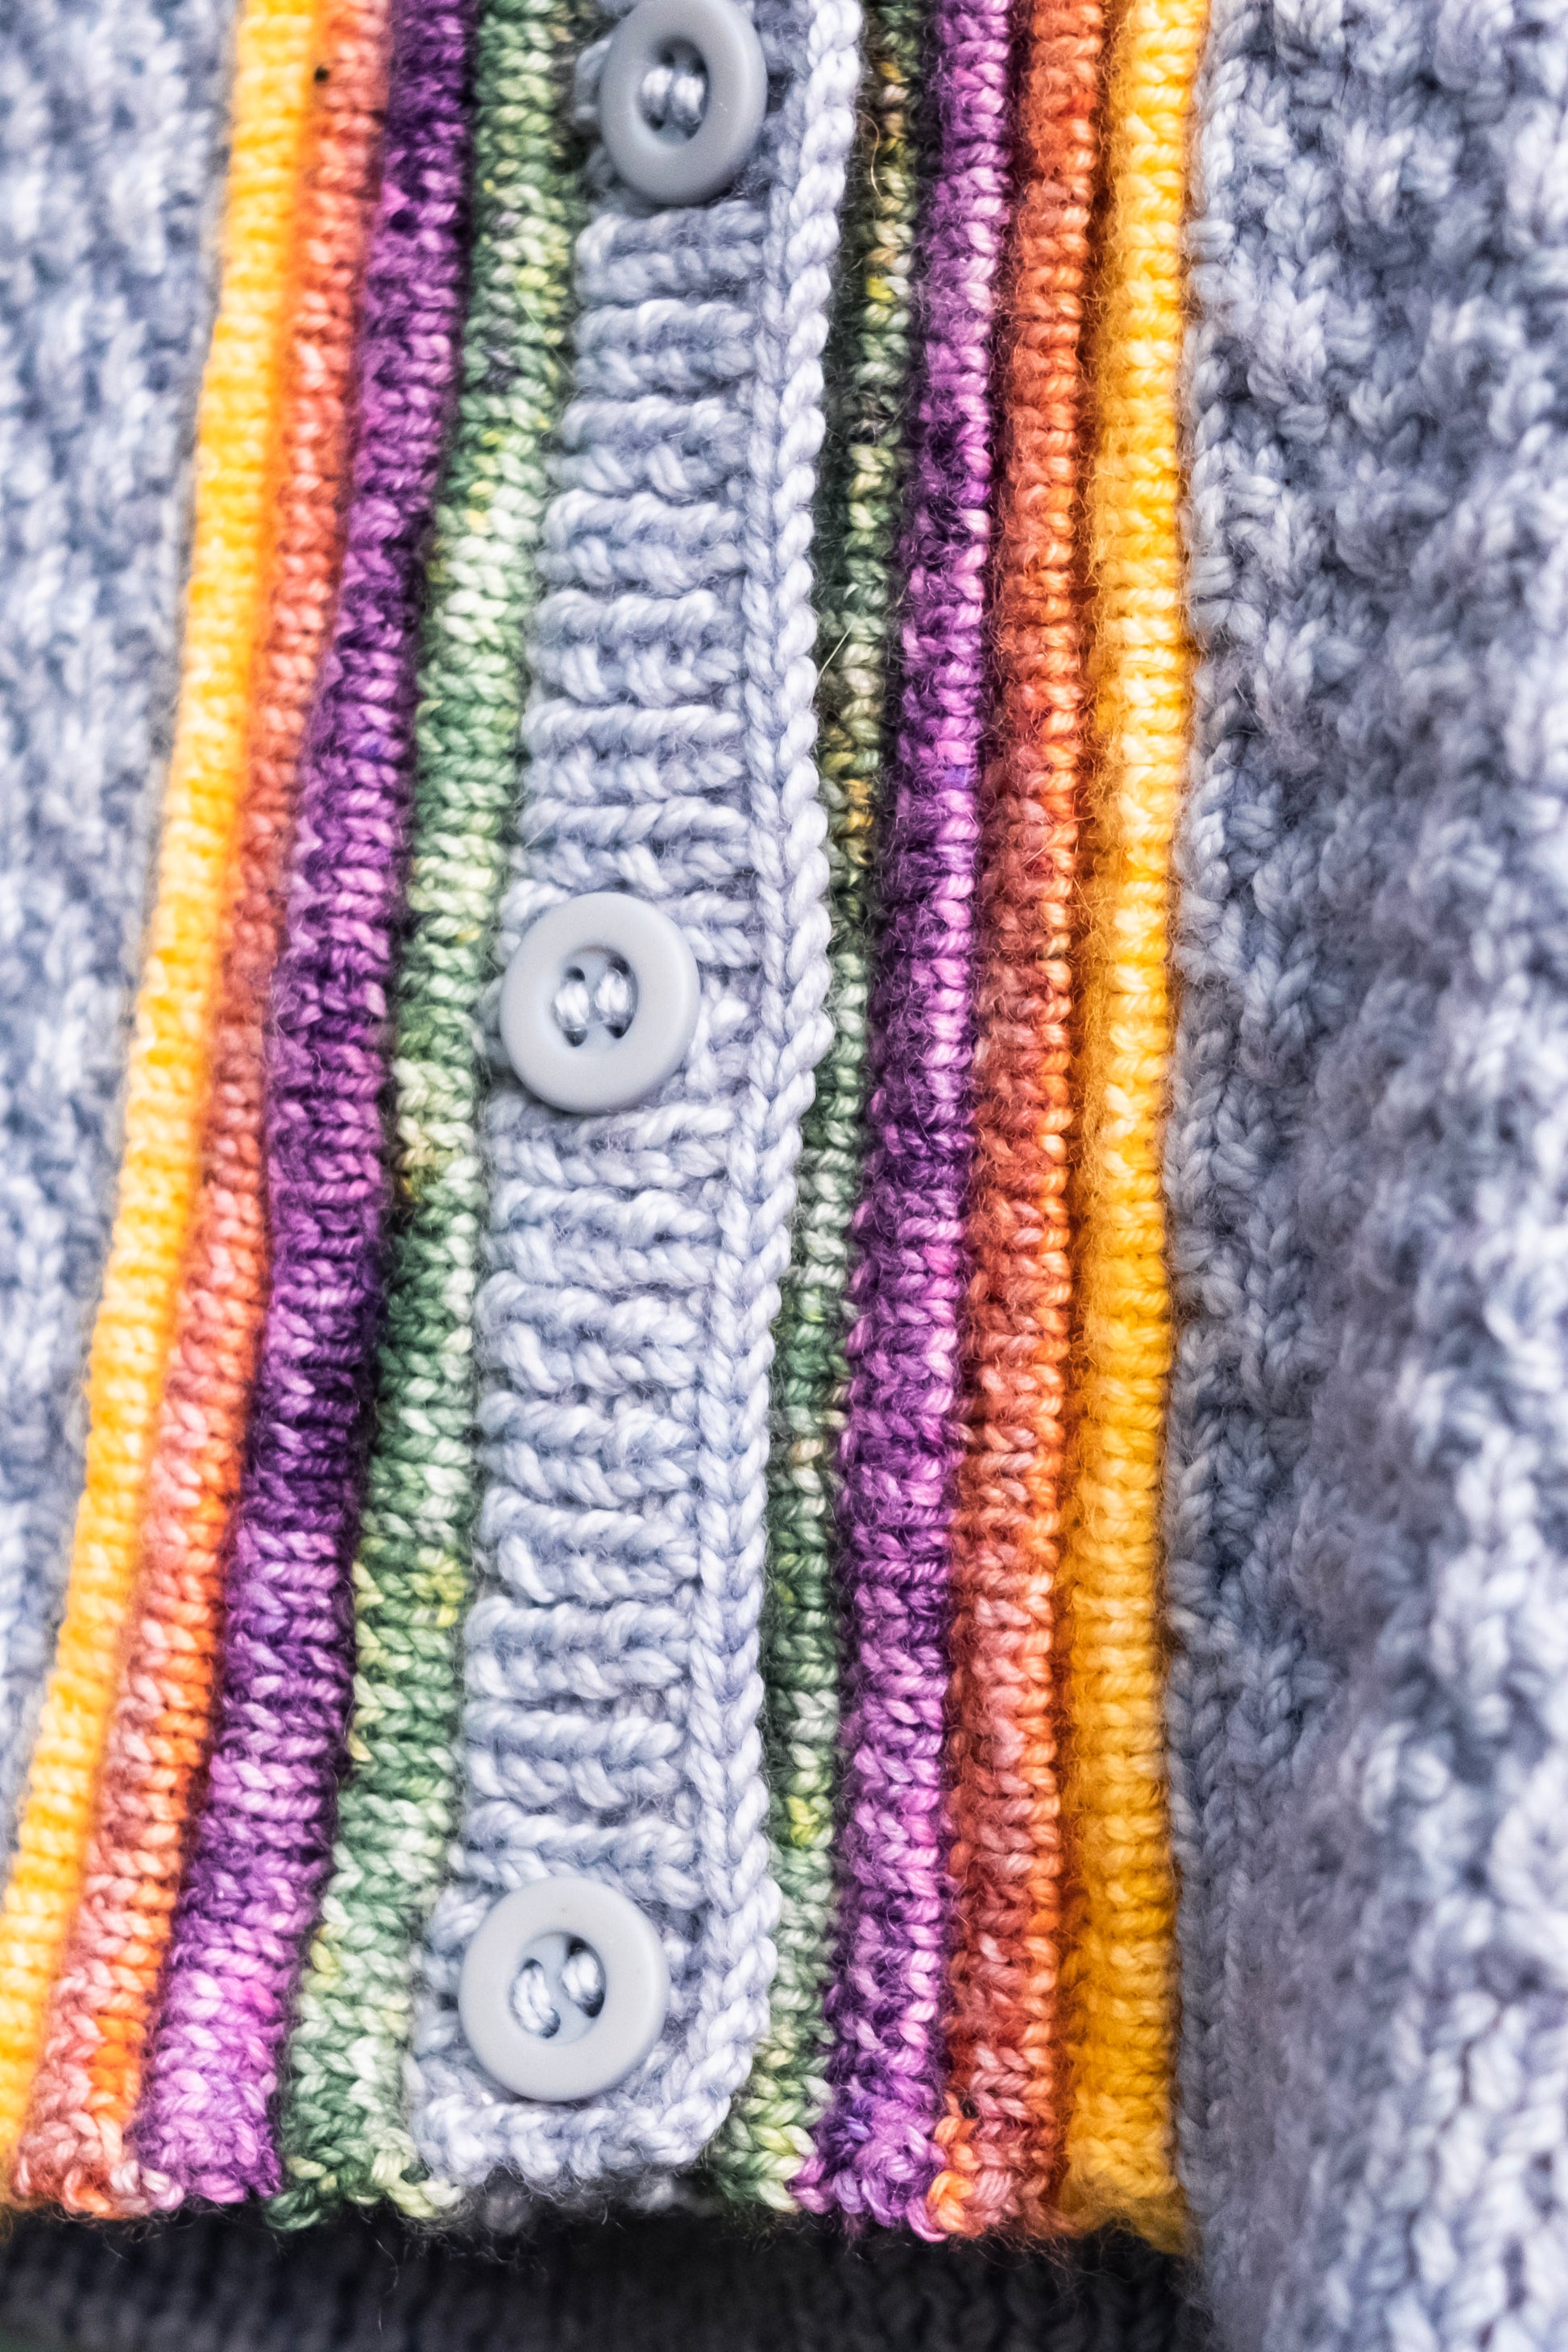 The camera focuses close up on the four plackets that surround the button band on the Letters to Camp sweater. The plackets are knit with yellow, orange, purple, and green yarn, and the sweater itself knit from blue. Three blue buttons can be seen.